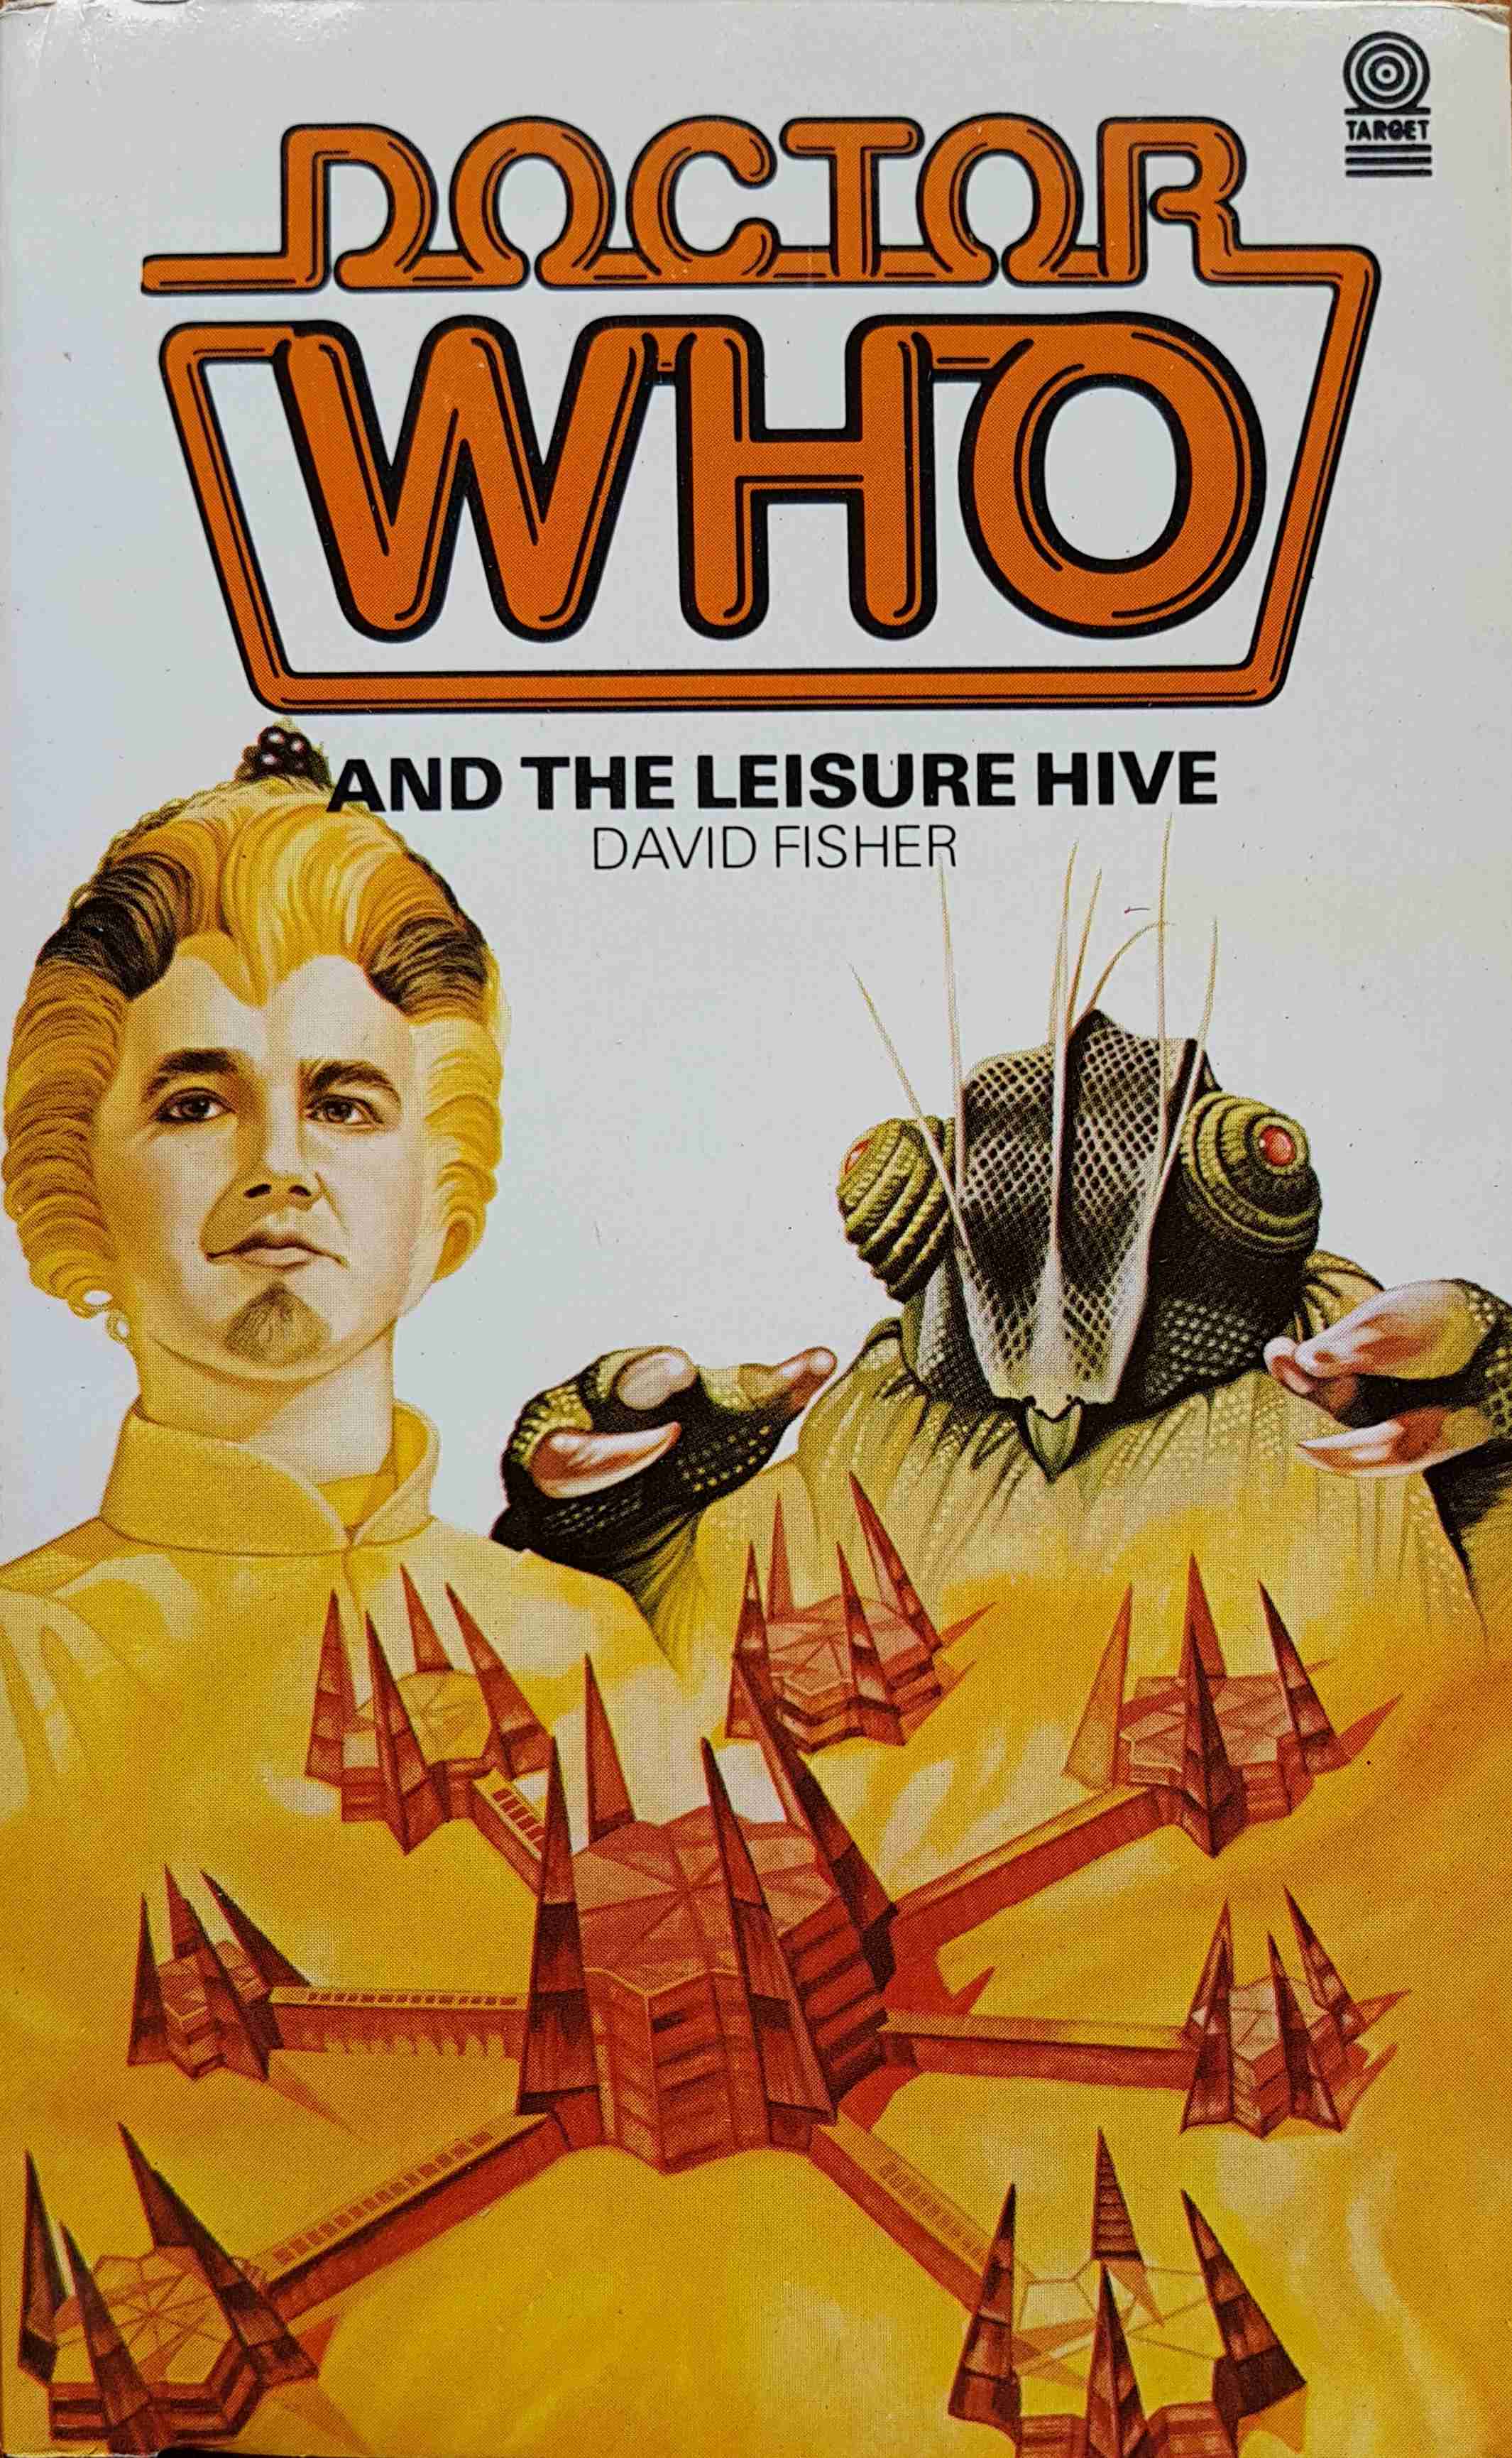 Picture of Doctor Who - The leisure hive by artist David Fisher from the BBC books - Records and Tapes library